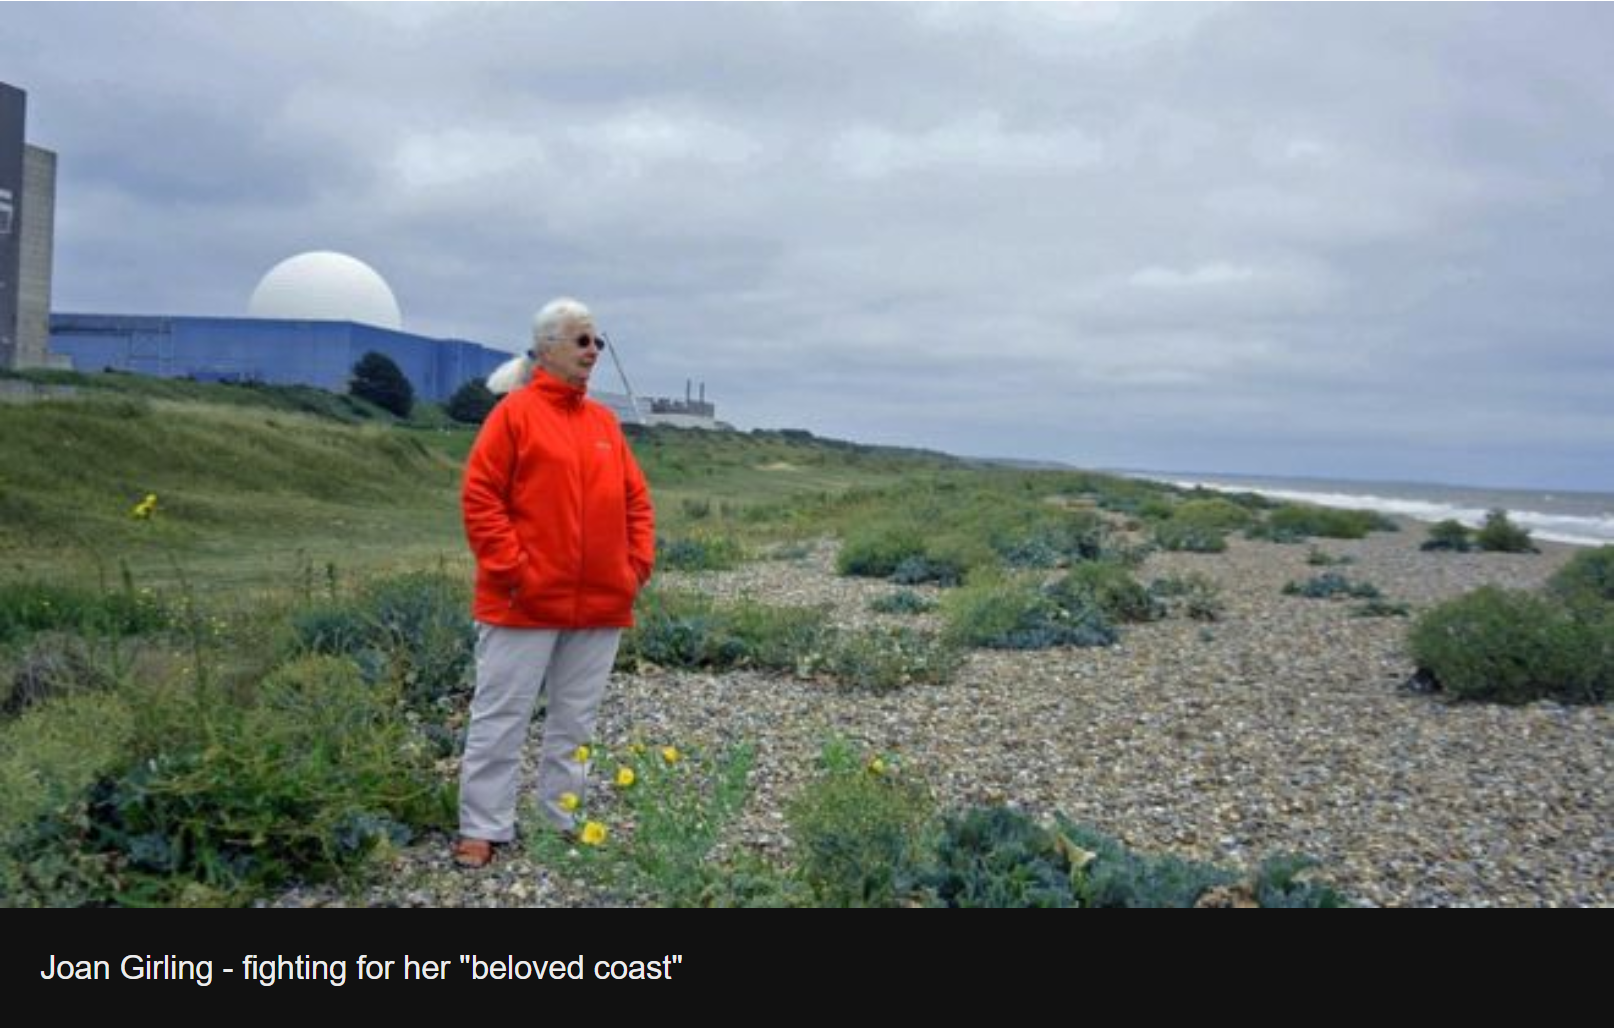 — Joan Girling, member of Together Against Sizewell C (TASC), an environmental group protesting against the French energy company EDF.